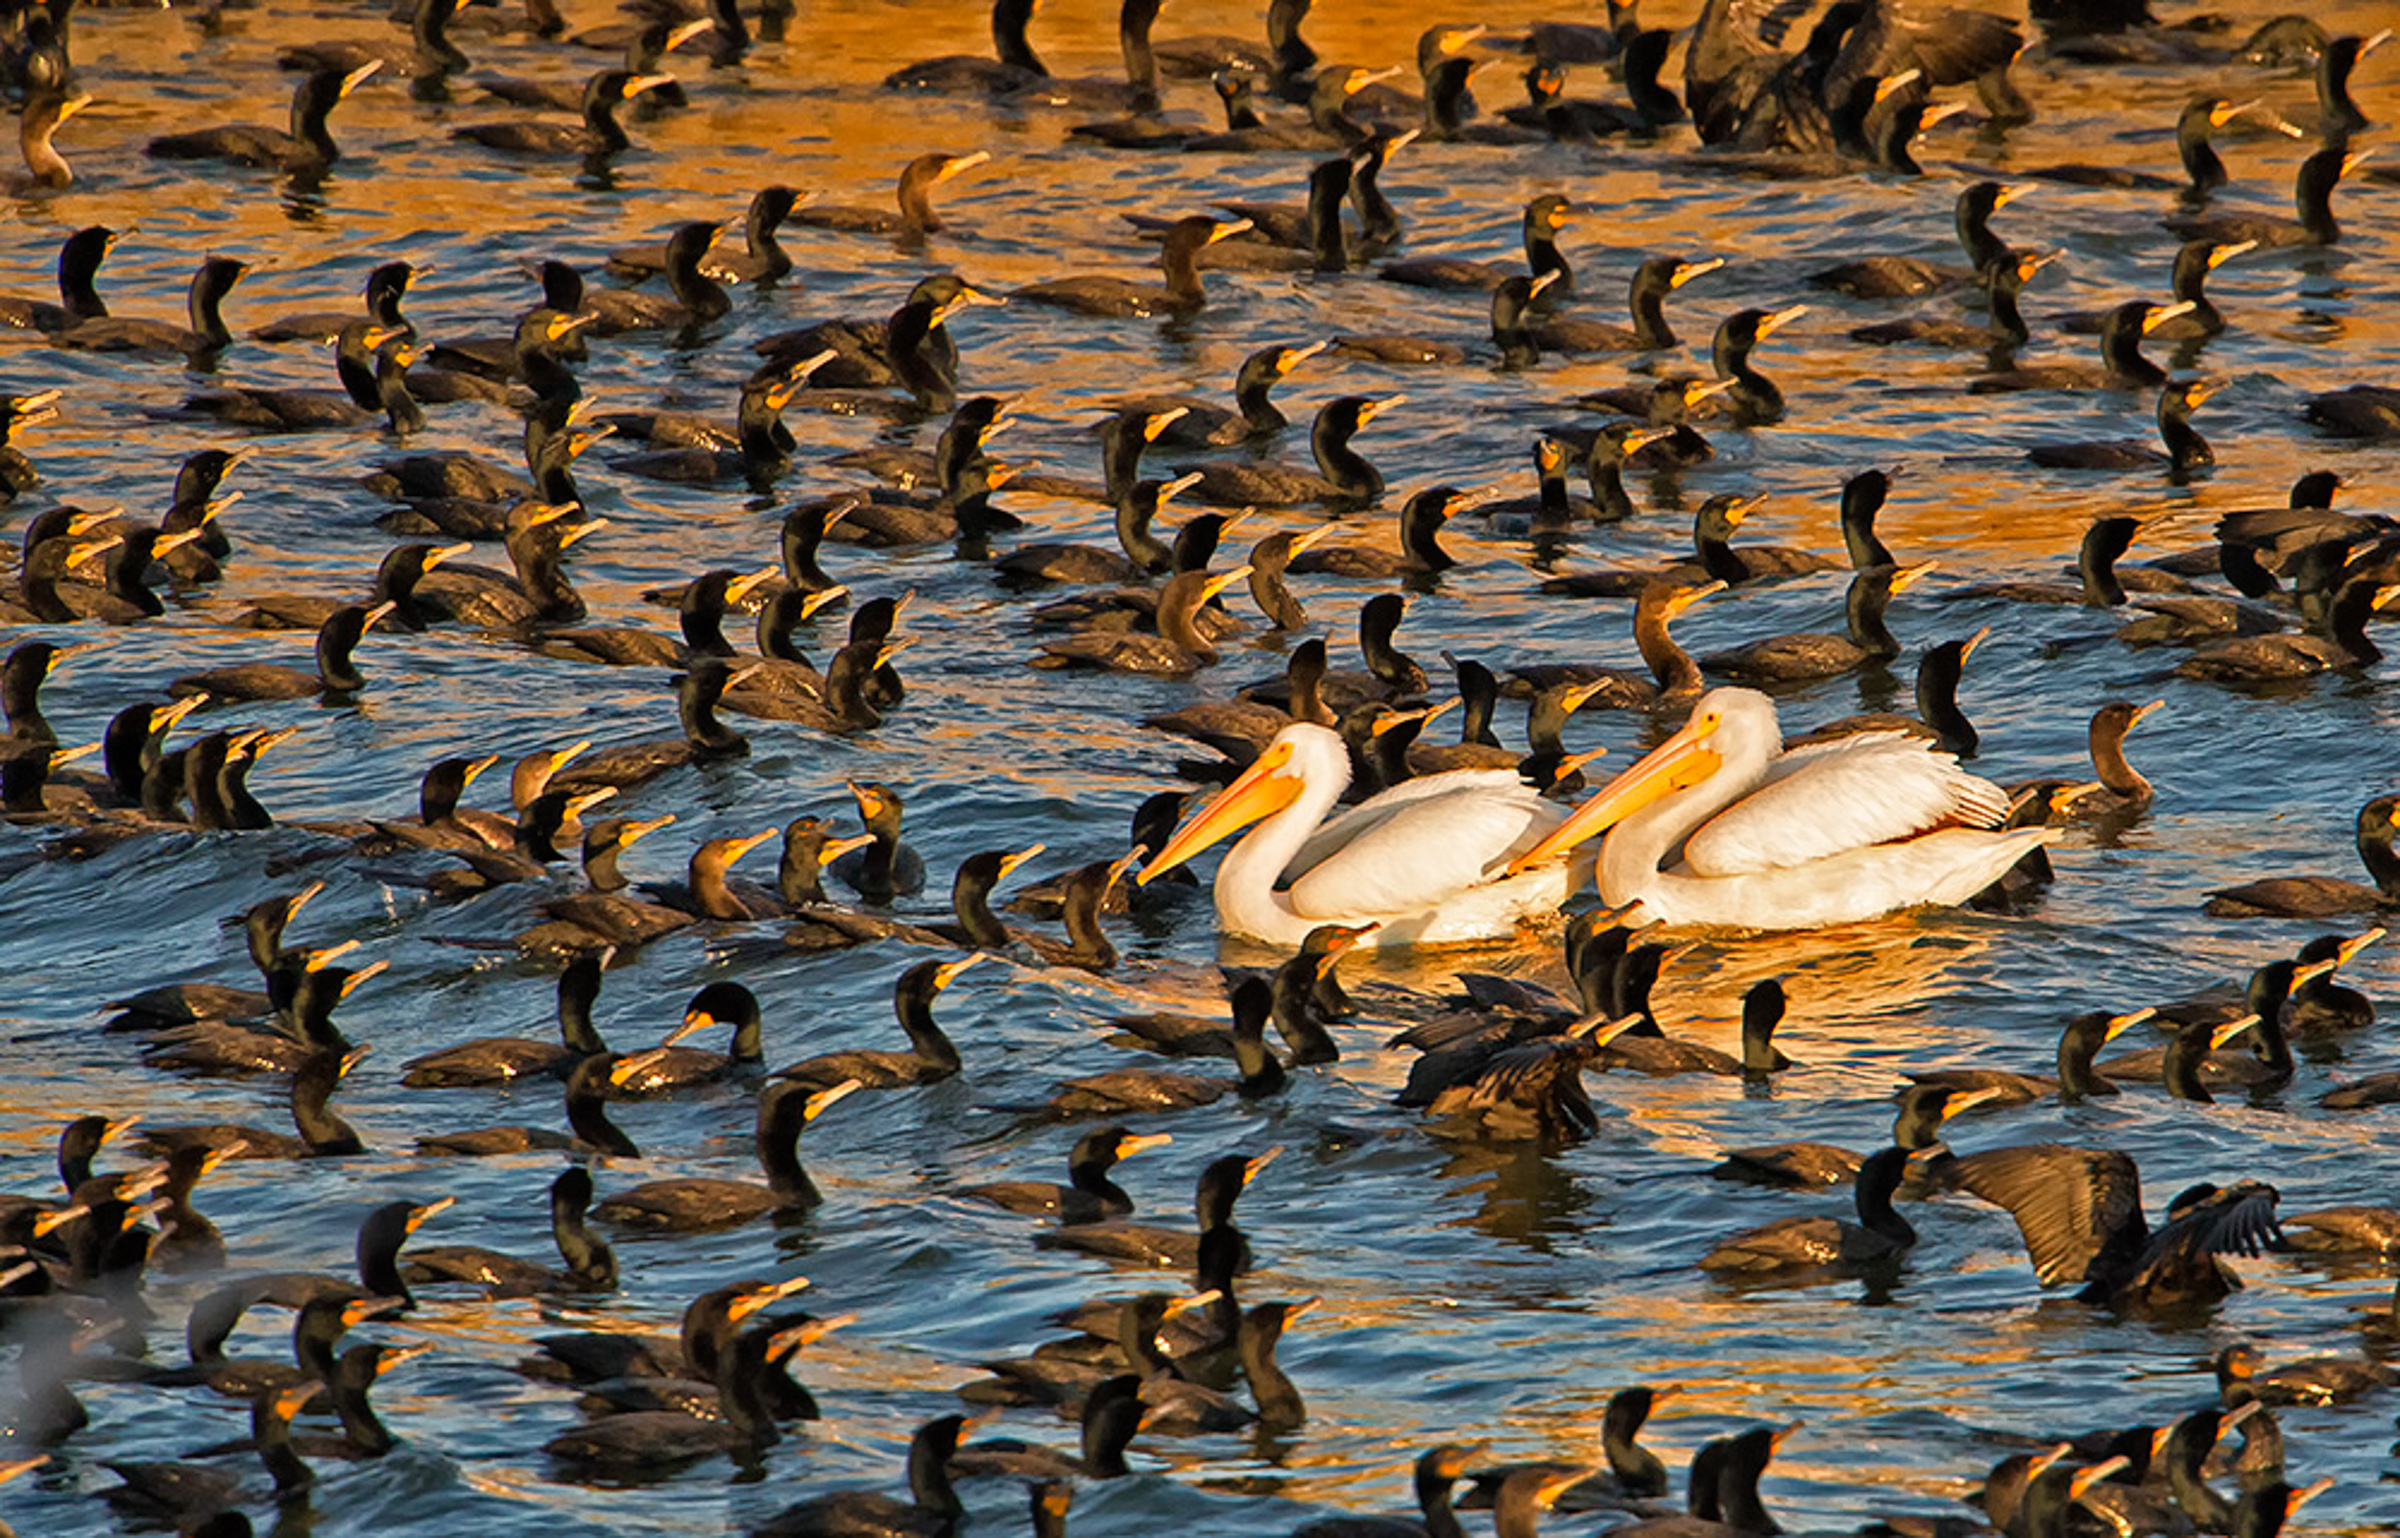 A pair of White Pelicans surrounded by a flock of cormorants.